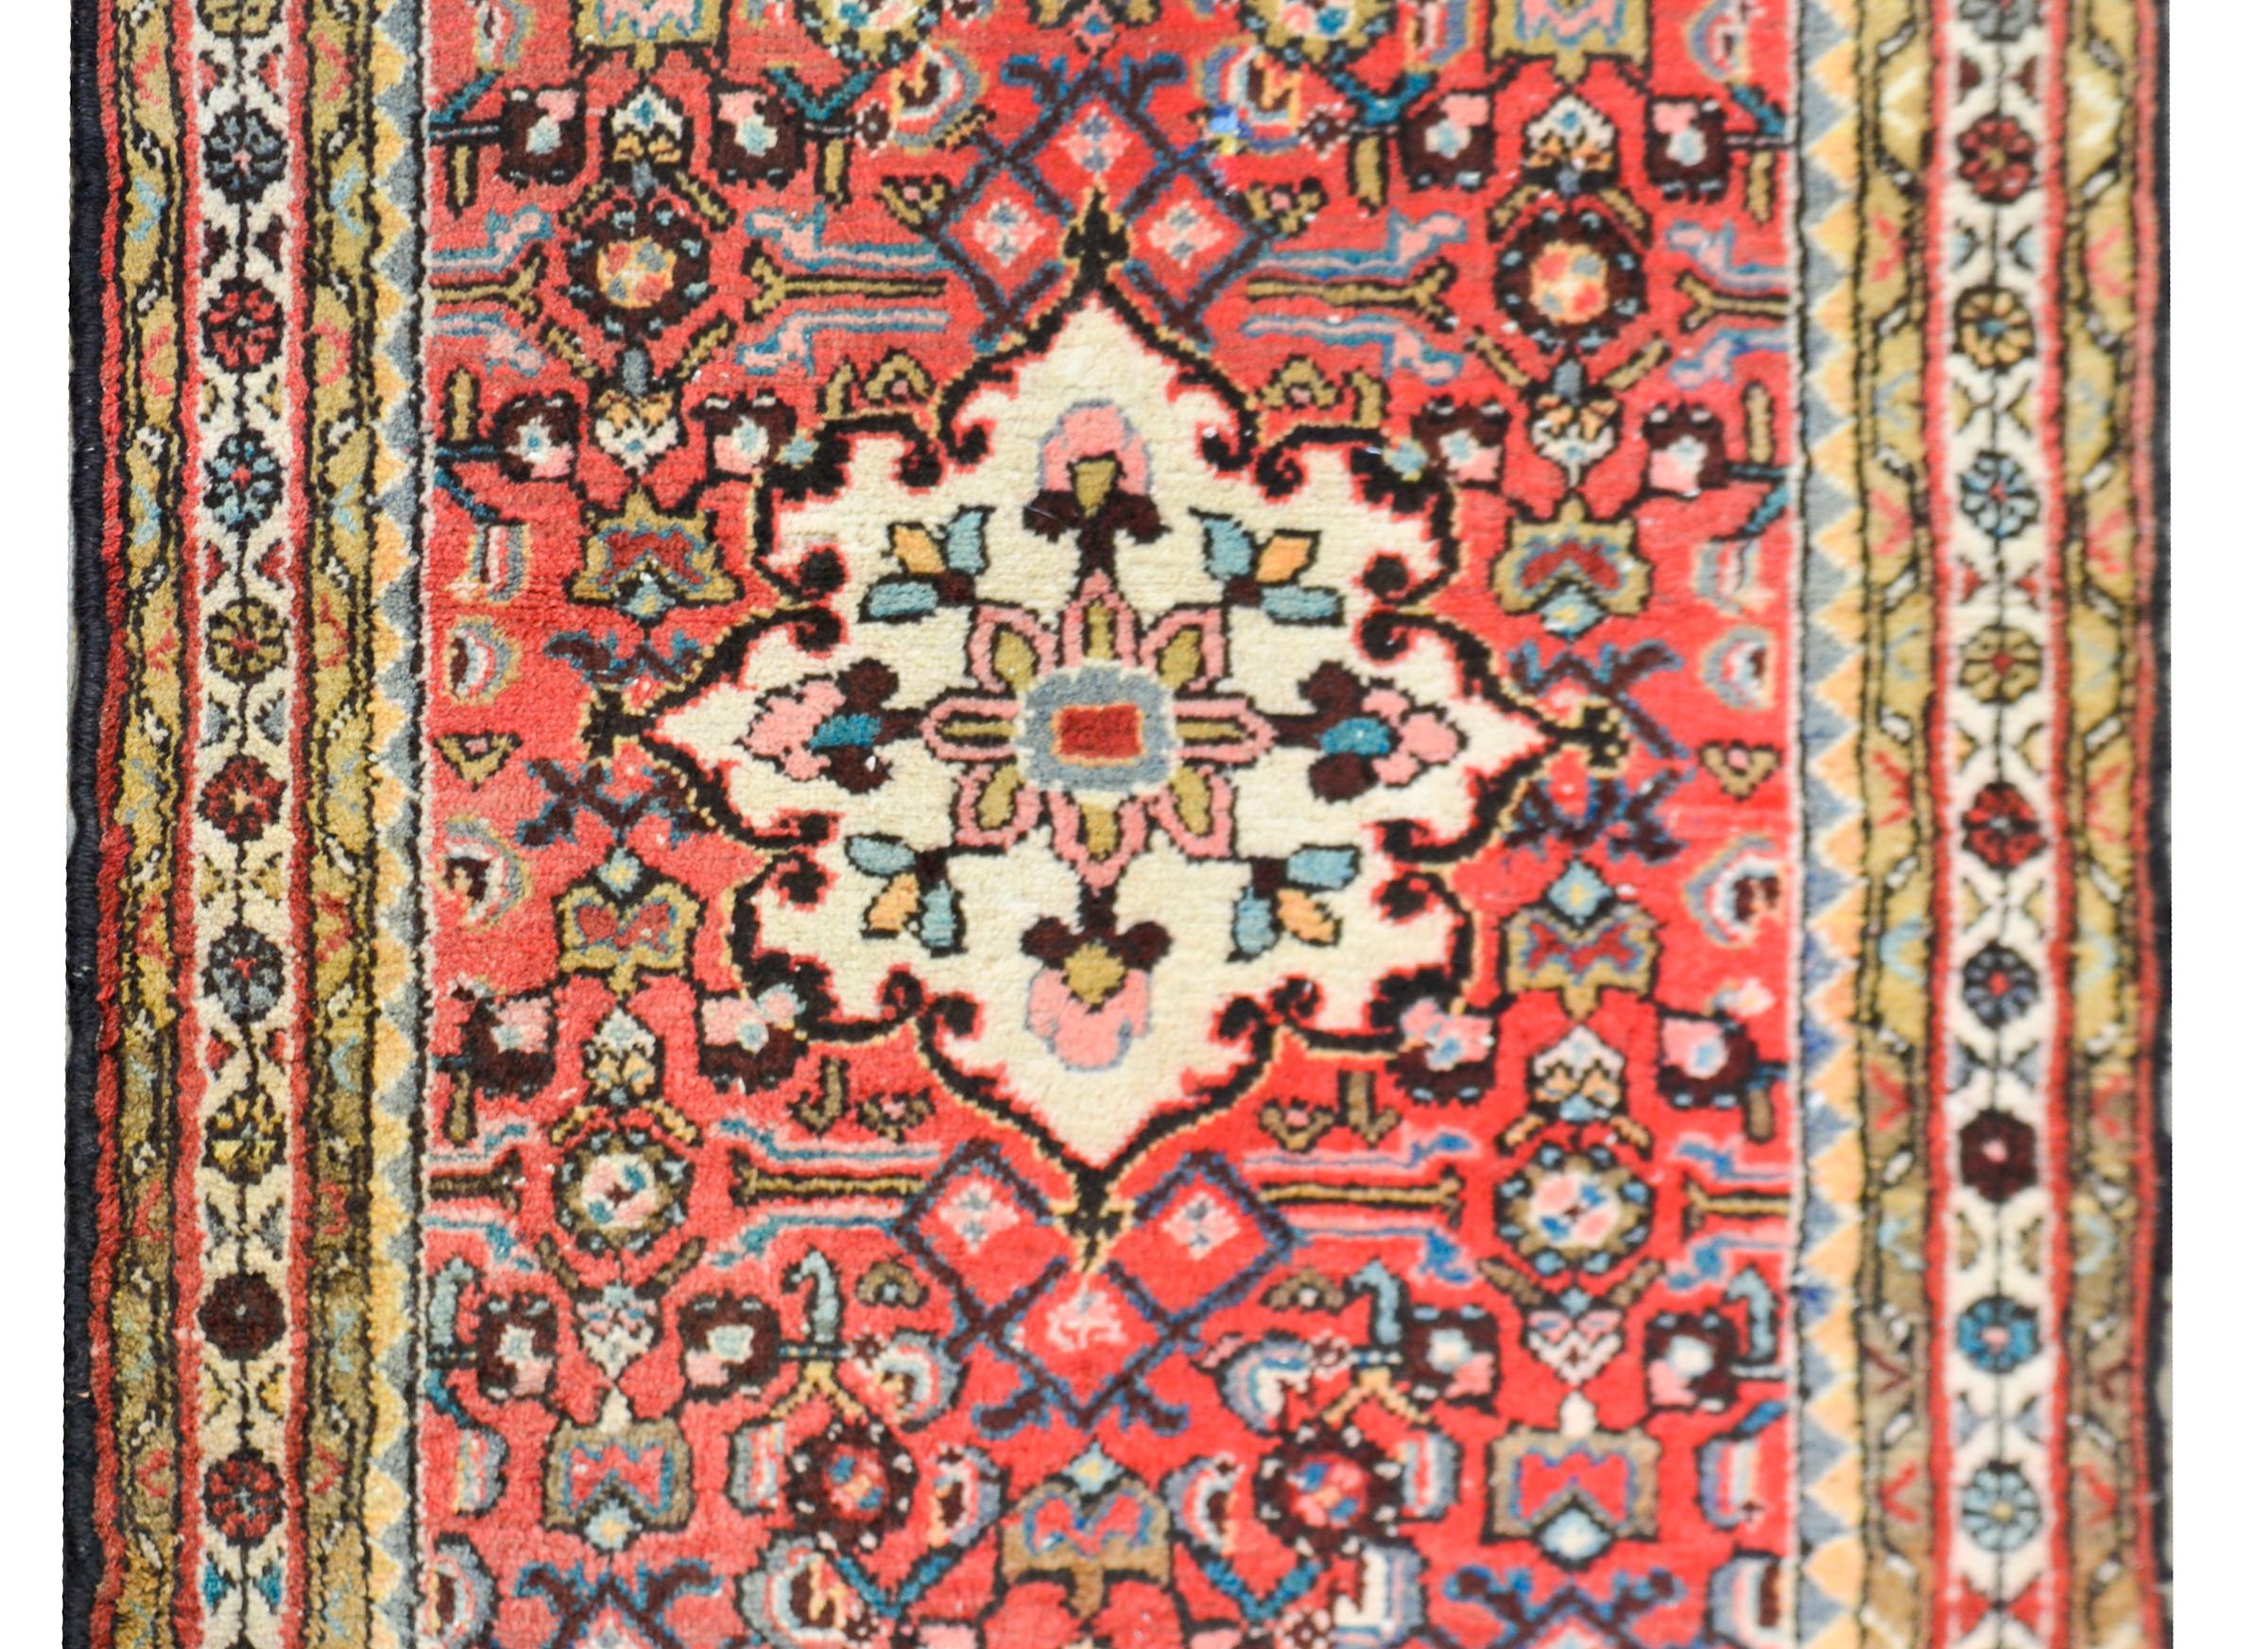 A sweet 20th century Persian Hamadan rug with a floral patterned medallion set against a background with scrolling vines and more stylized flowers, and surrounded by multiple petite floral patterned stripes.